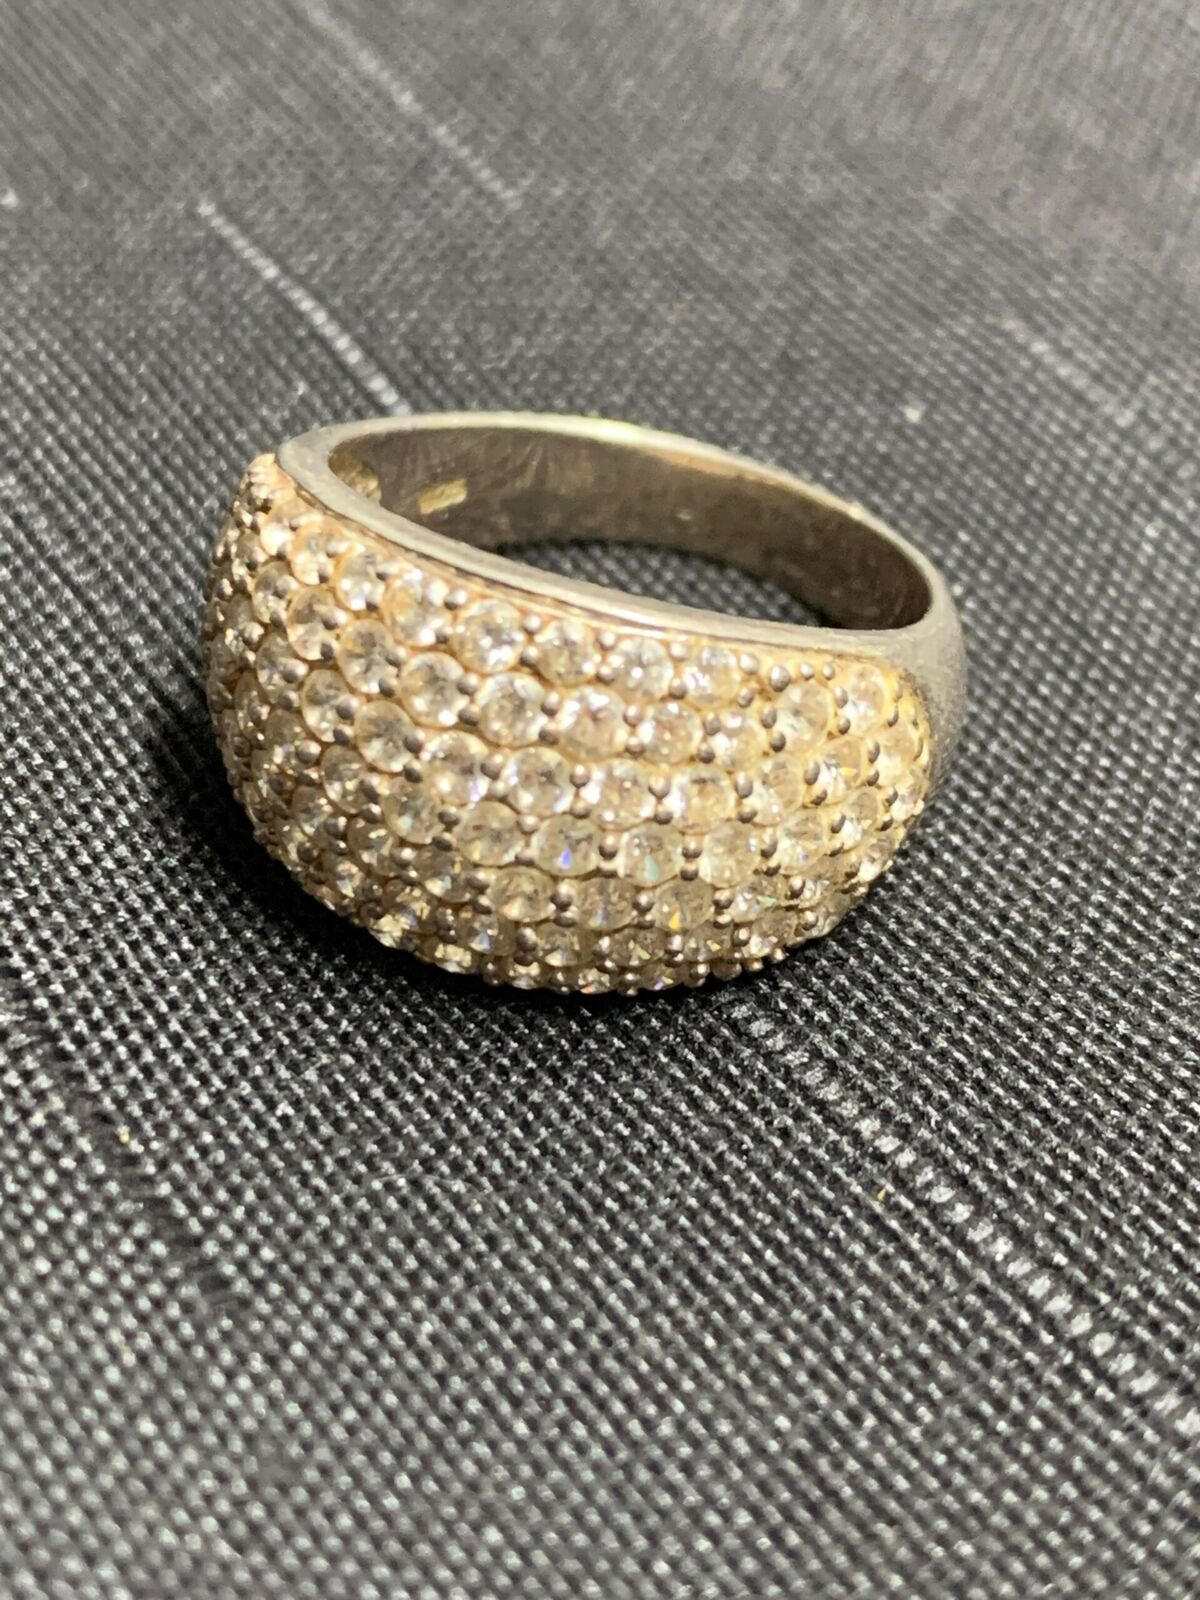 SILVER RING - WITH MANY UNIDENTIFIED WHITE STONE SETTINGS